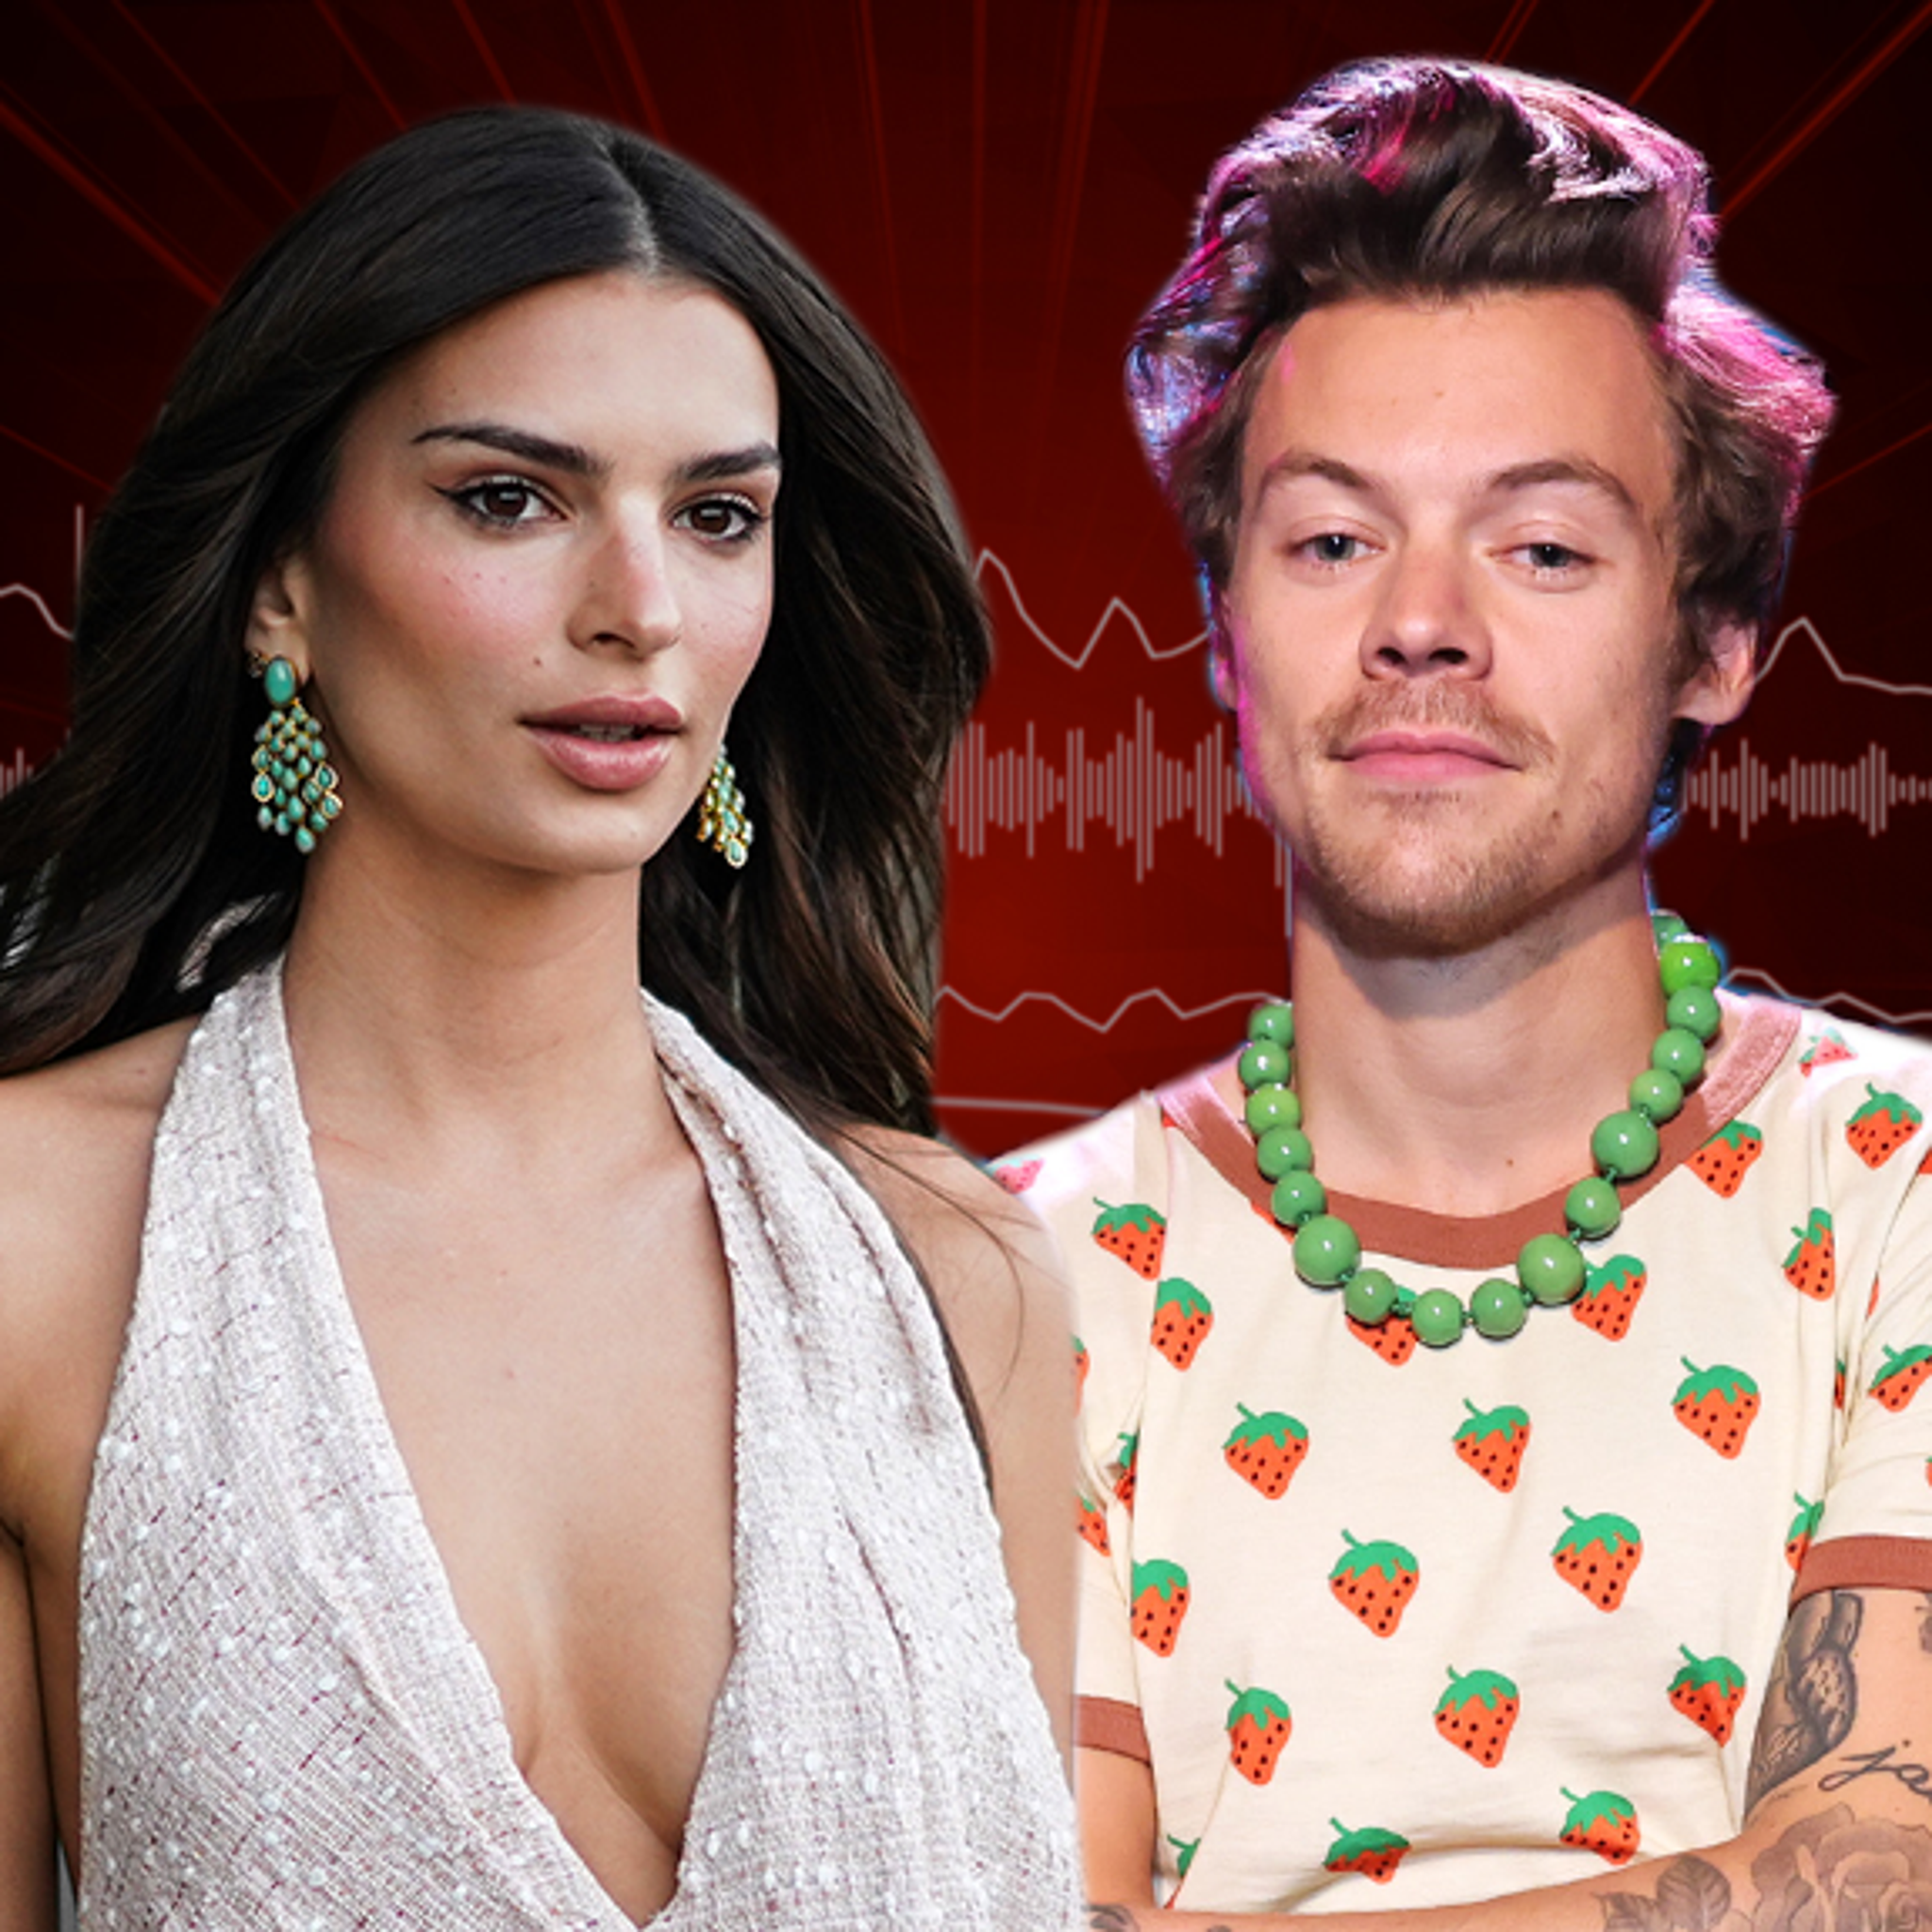 Who Is Harry Styles Dating?